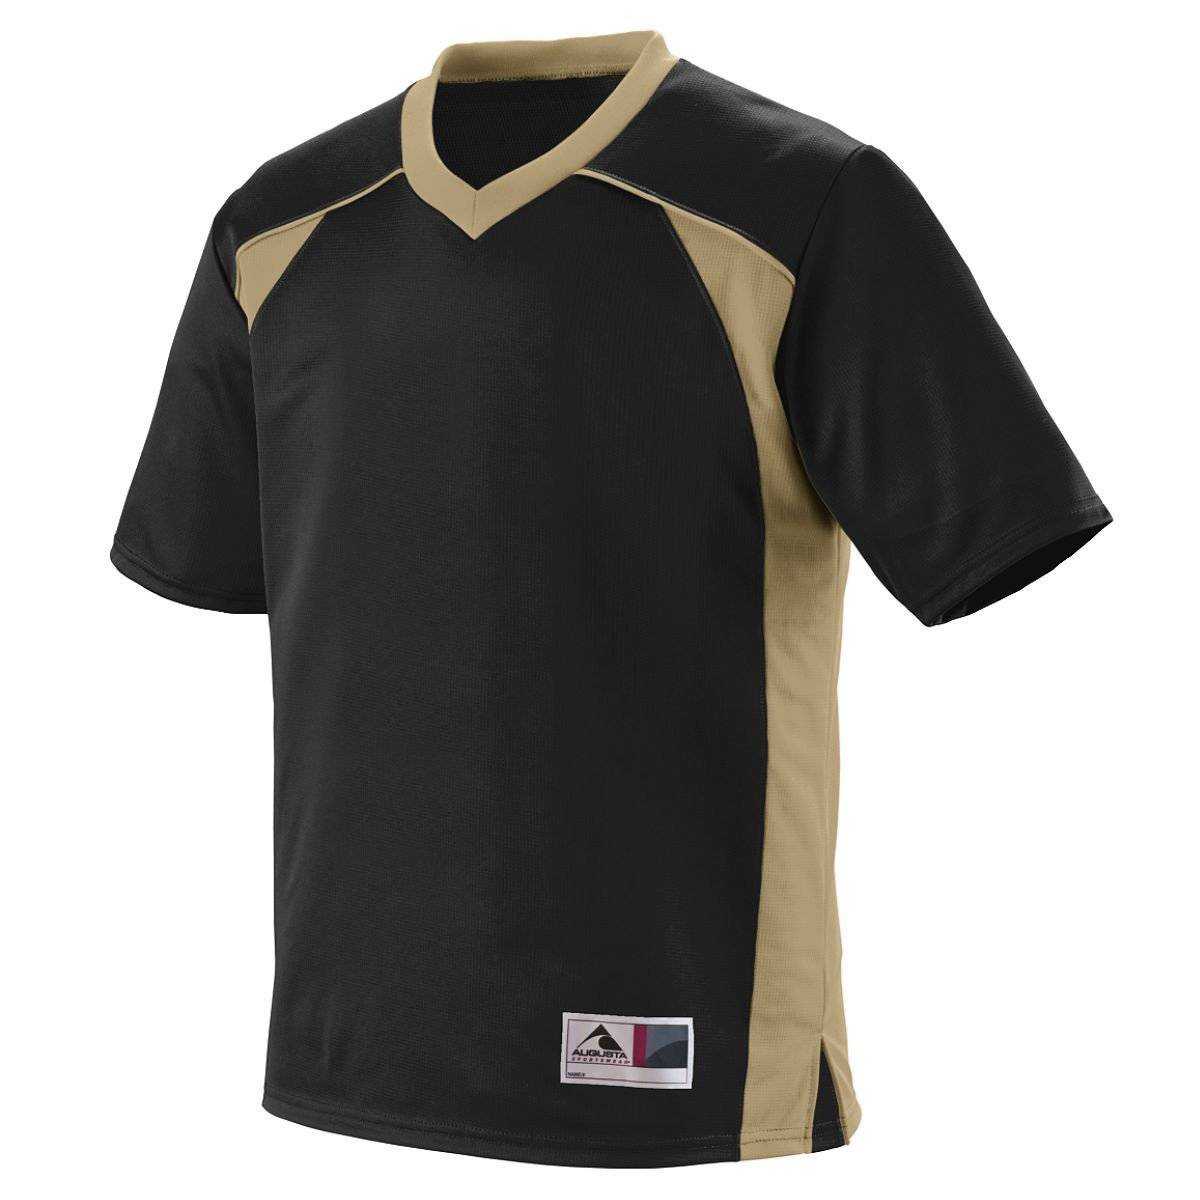 Augusta 260 Victor Replica Jersey - Black Vegas Gold - HIT a Double